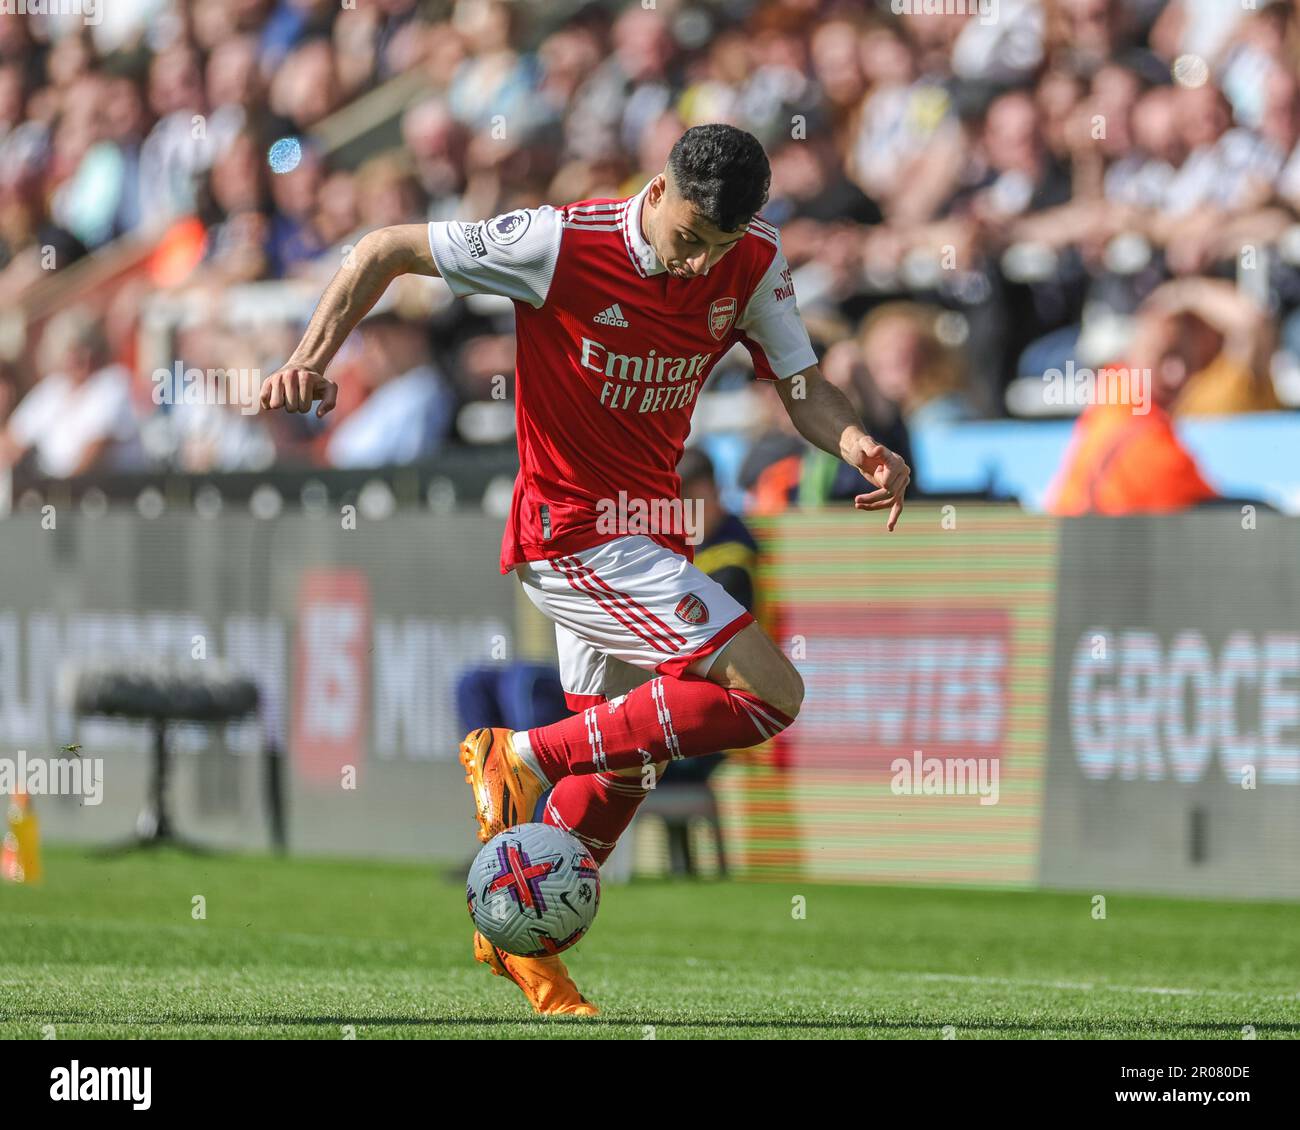 Newcastle, UK. 07th May, 2023. Gabriel Martinelli #11 of Arsenal in action  during the Premier League match Newcastle United vs Arsenal at St. James's  Park, Newcastle, United Kingdom, 7th May 2023 (Photo